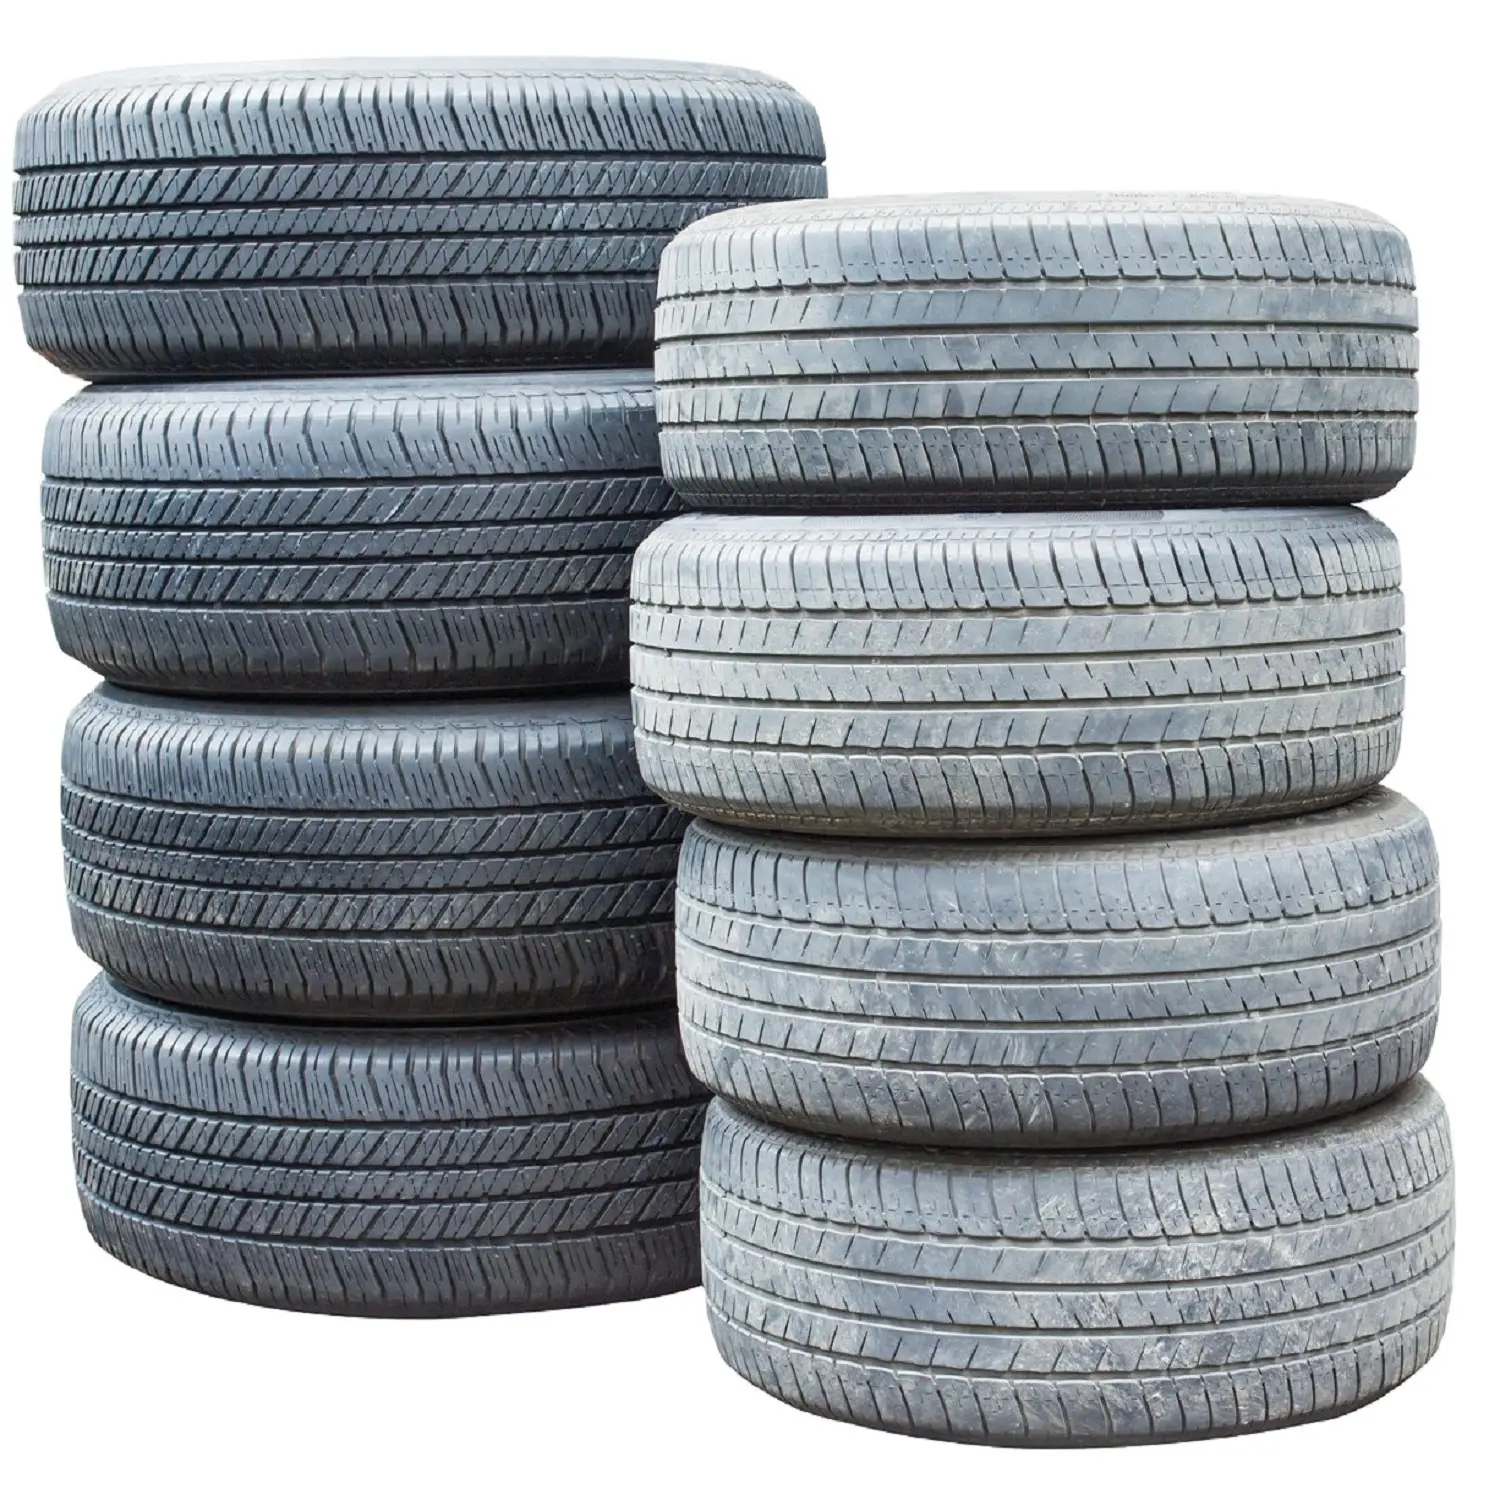 Good Grade Perfect Used Car tires in bulk for sale Perfect Used truck Tyres In Bulk FOR SALE